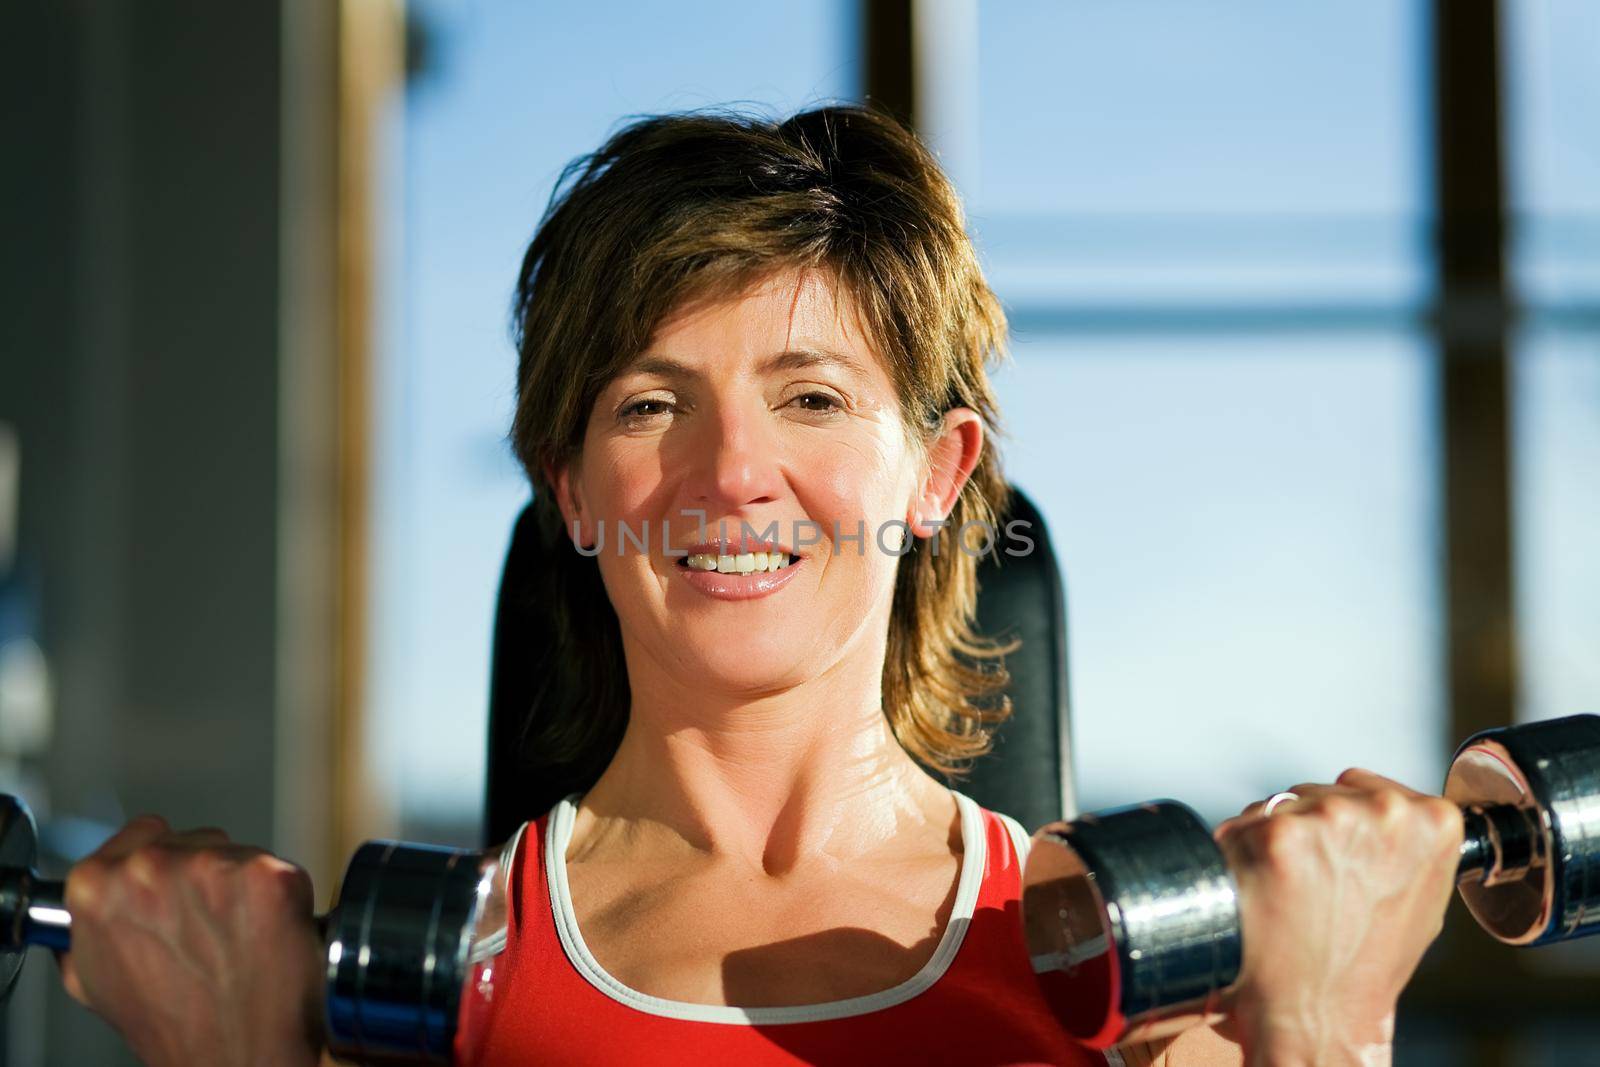 Mature woman lifting dumbbells exercising in a gym; focus on her face